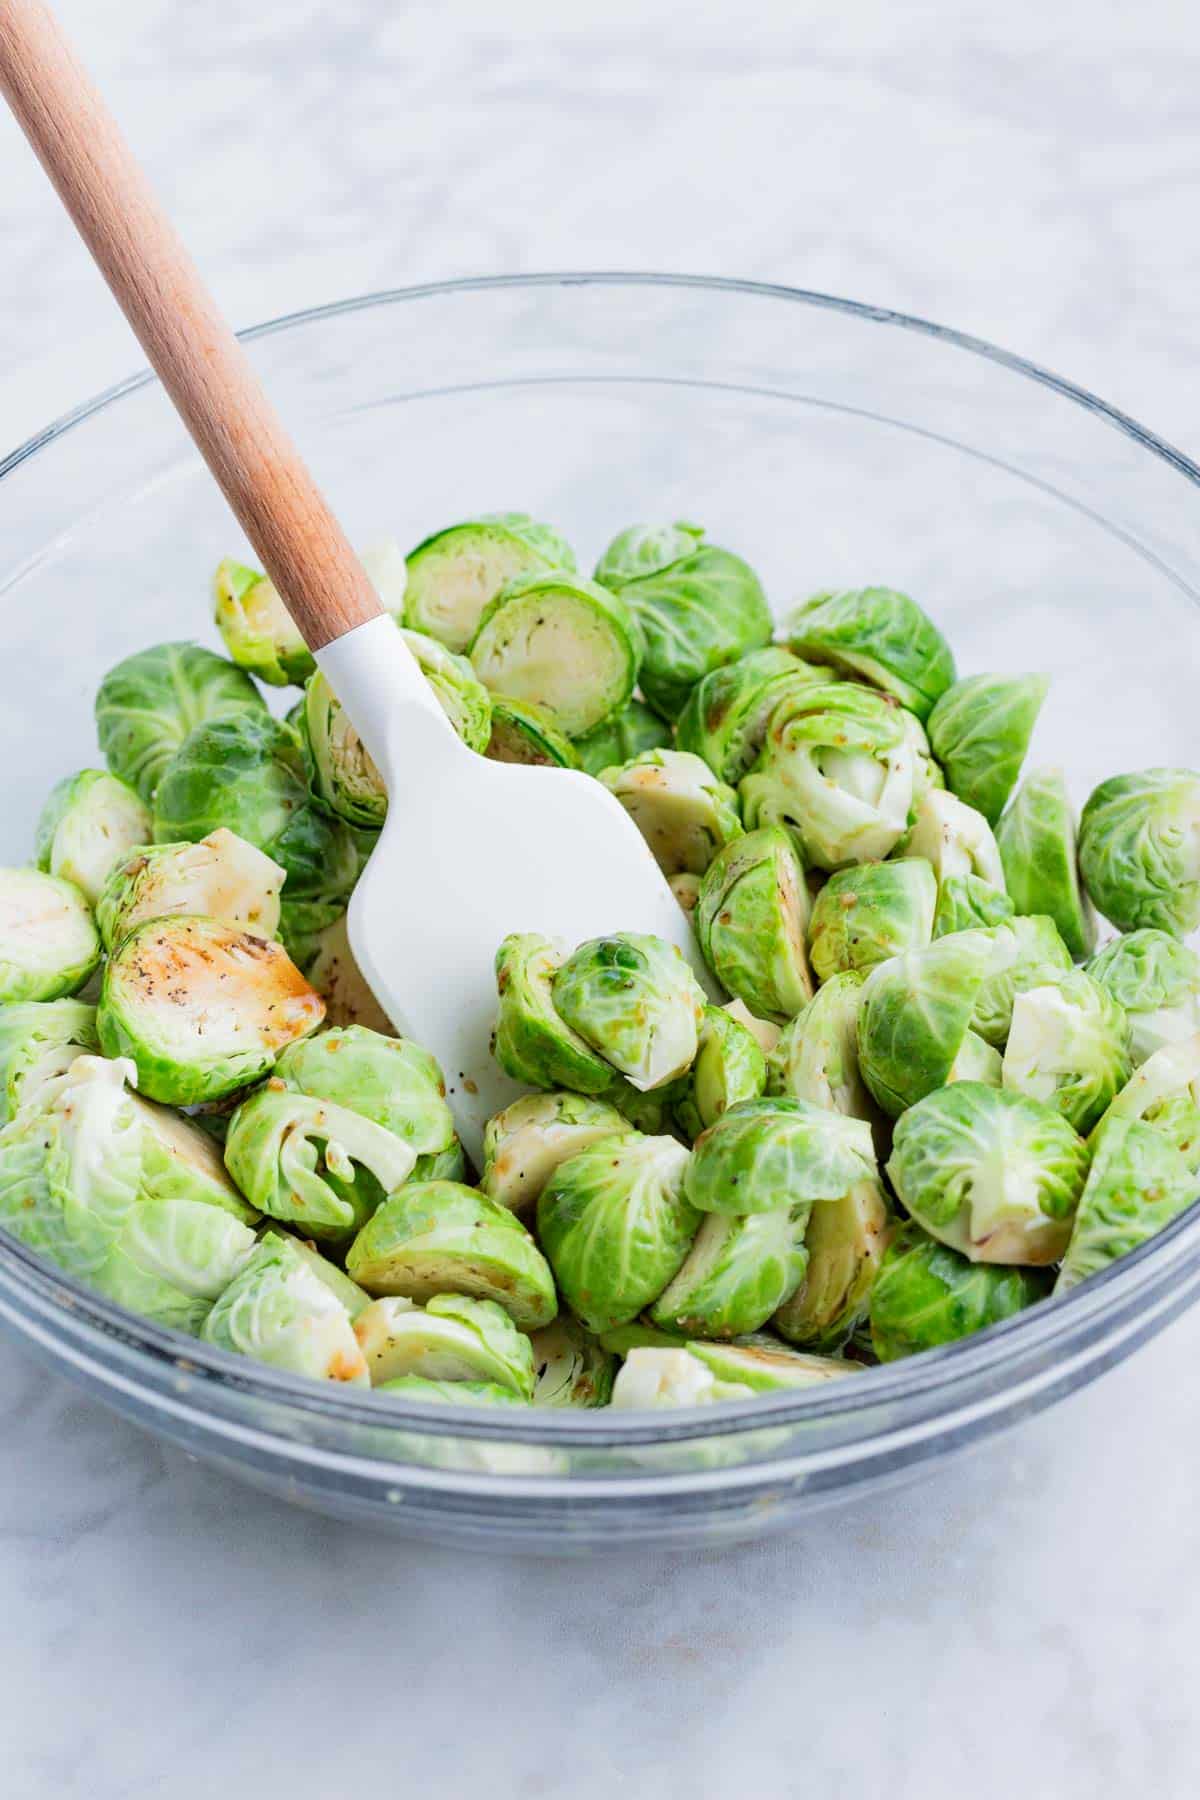 Brussels sprouts are coated with the sauce before roasting.